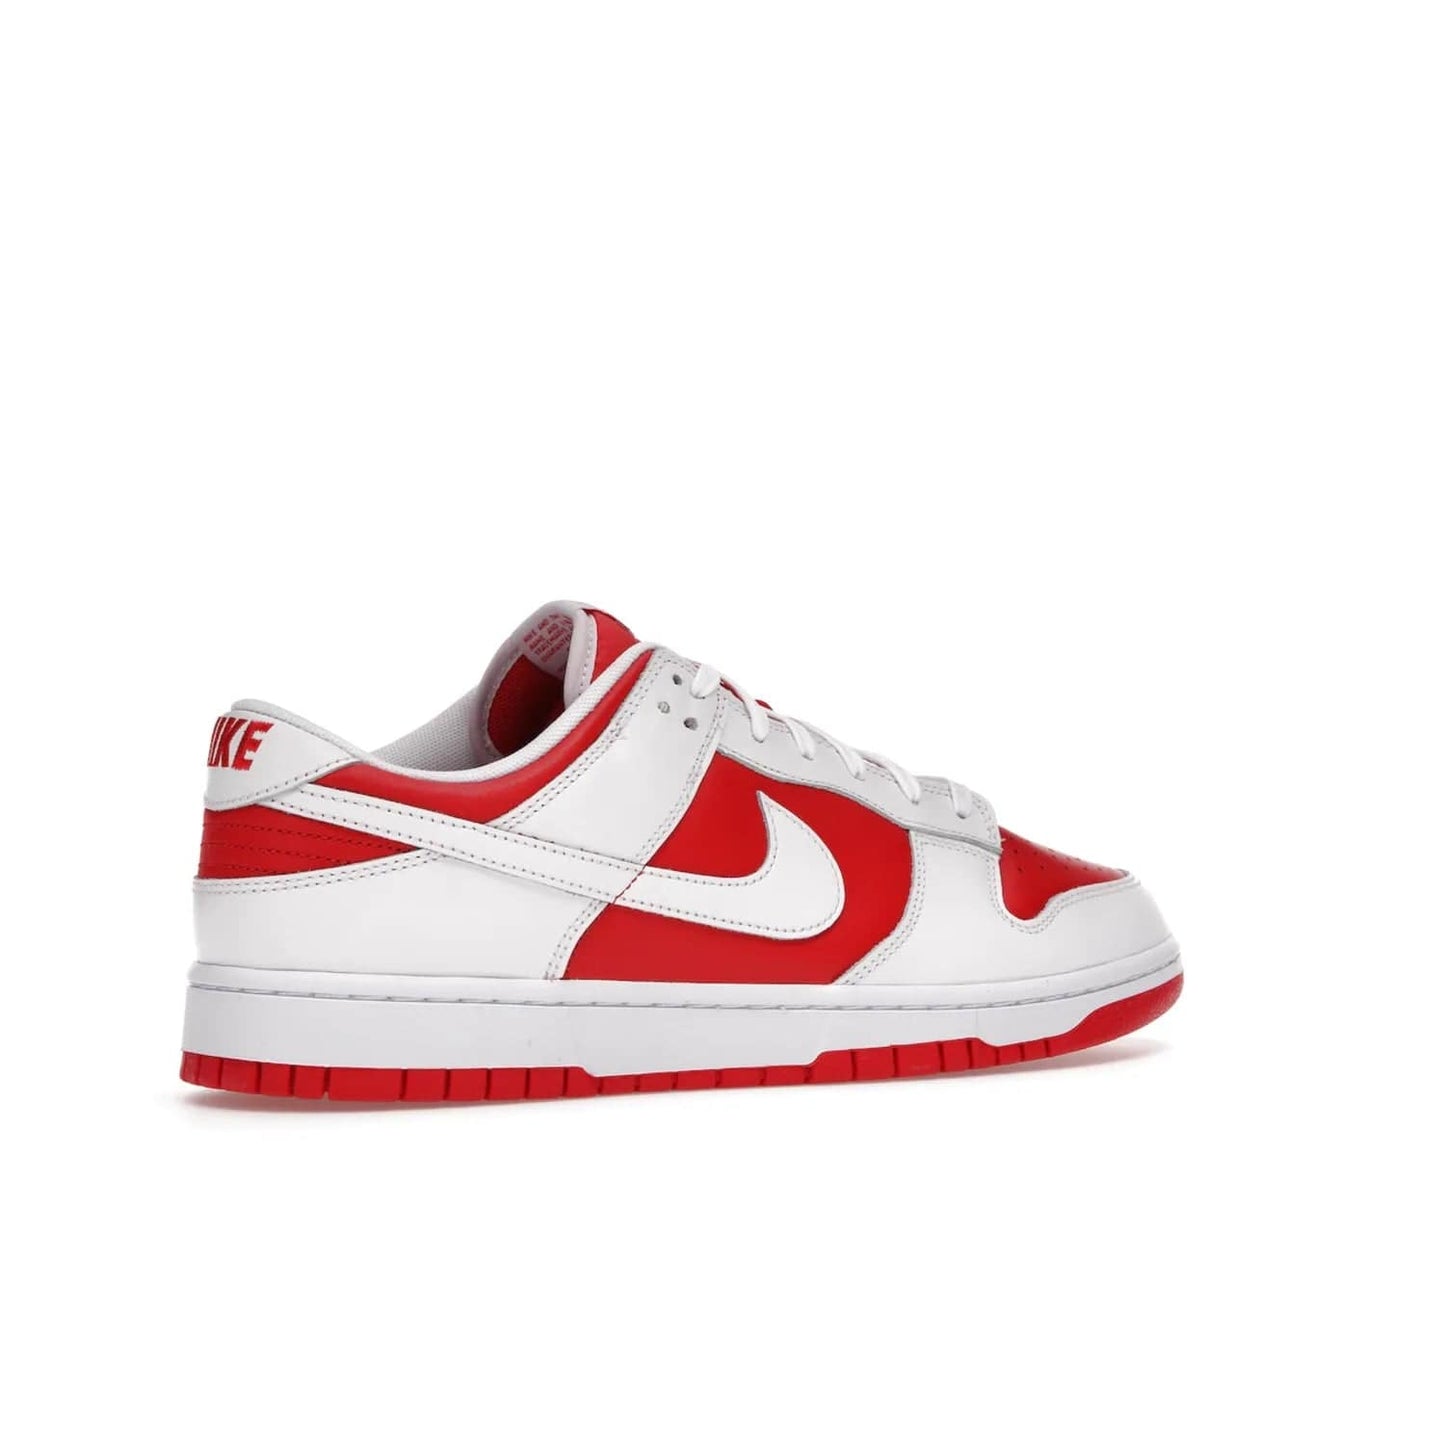 Nike Dunk Low Championship Red (2021) - Image 34 - Only at www.BallersClubKickz.com - A bold and stylish Nike Dunk Low Championship Red from 2021 with a classic retro design. University Red upper, white leather overlays and Swooshes, and a woven tongue label. Make a statement with these sleek kicks!